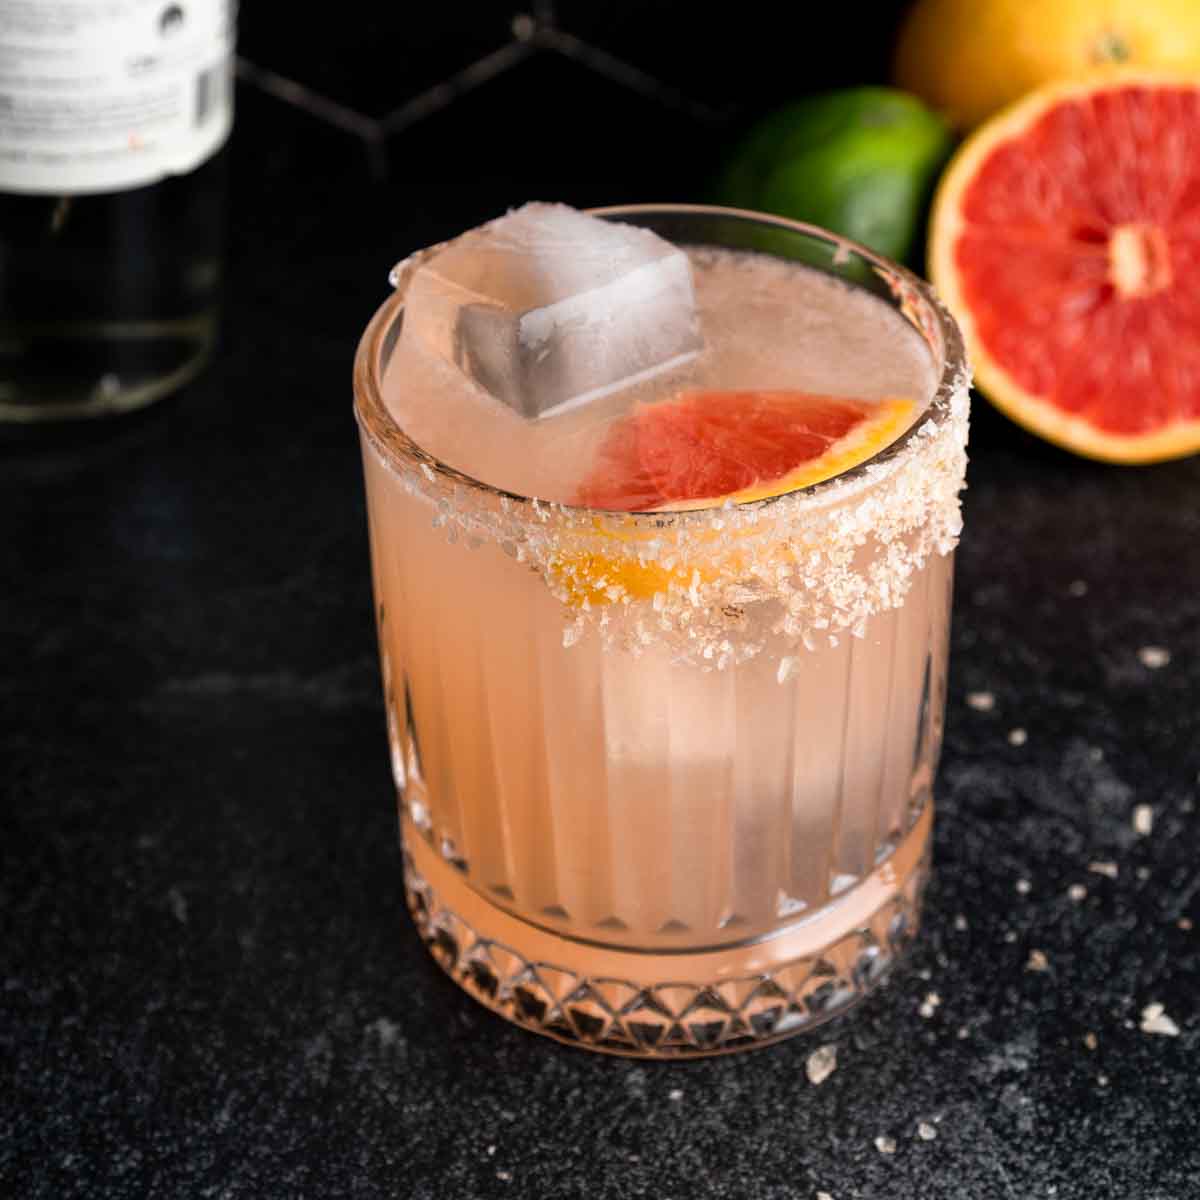 An icy mezcal cocktail in a glass rimmed with smoked salt next to a fresh grapefruit.